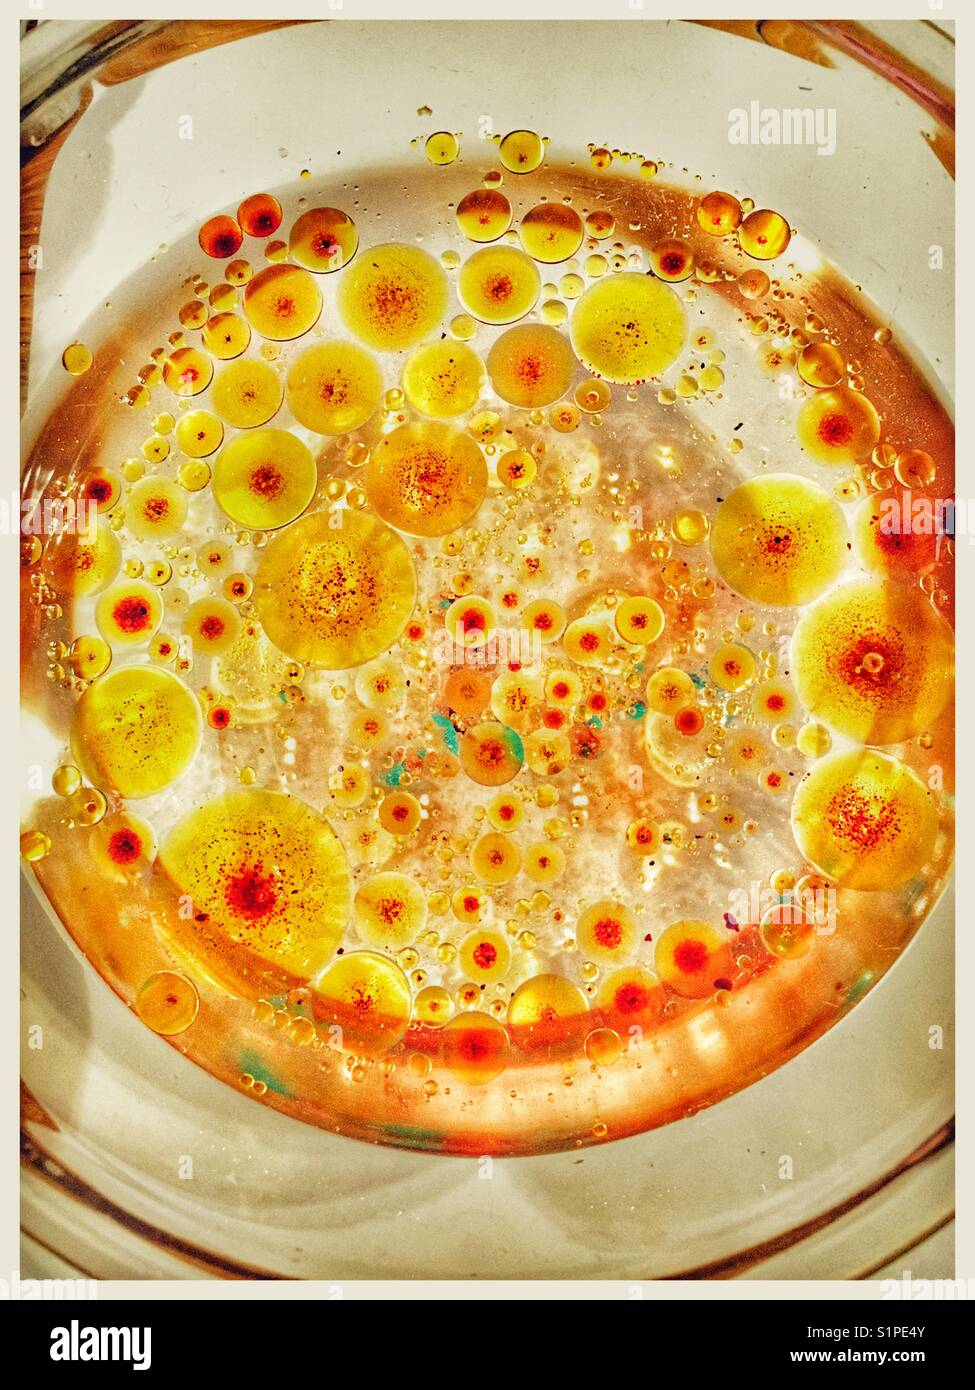 Oil and food colouring suspended in water. Stock Photo